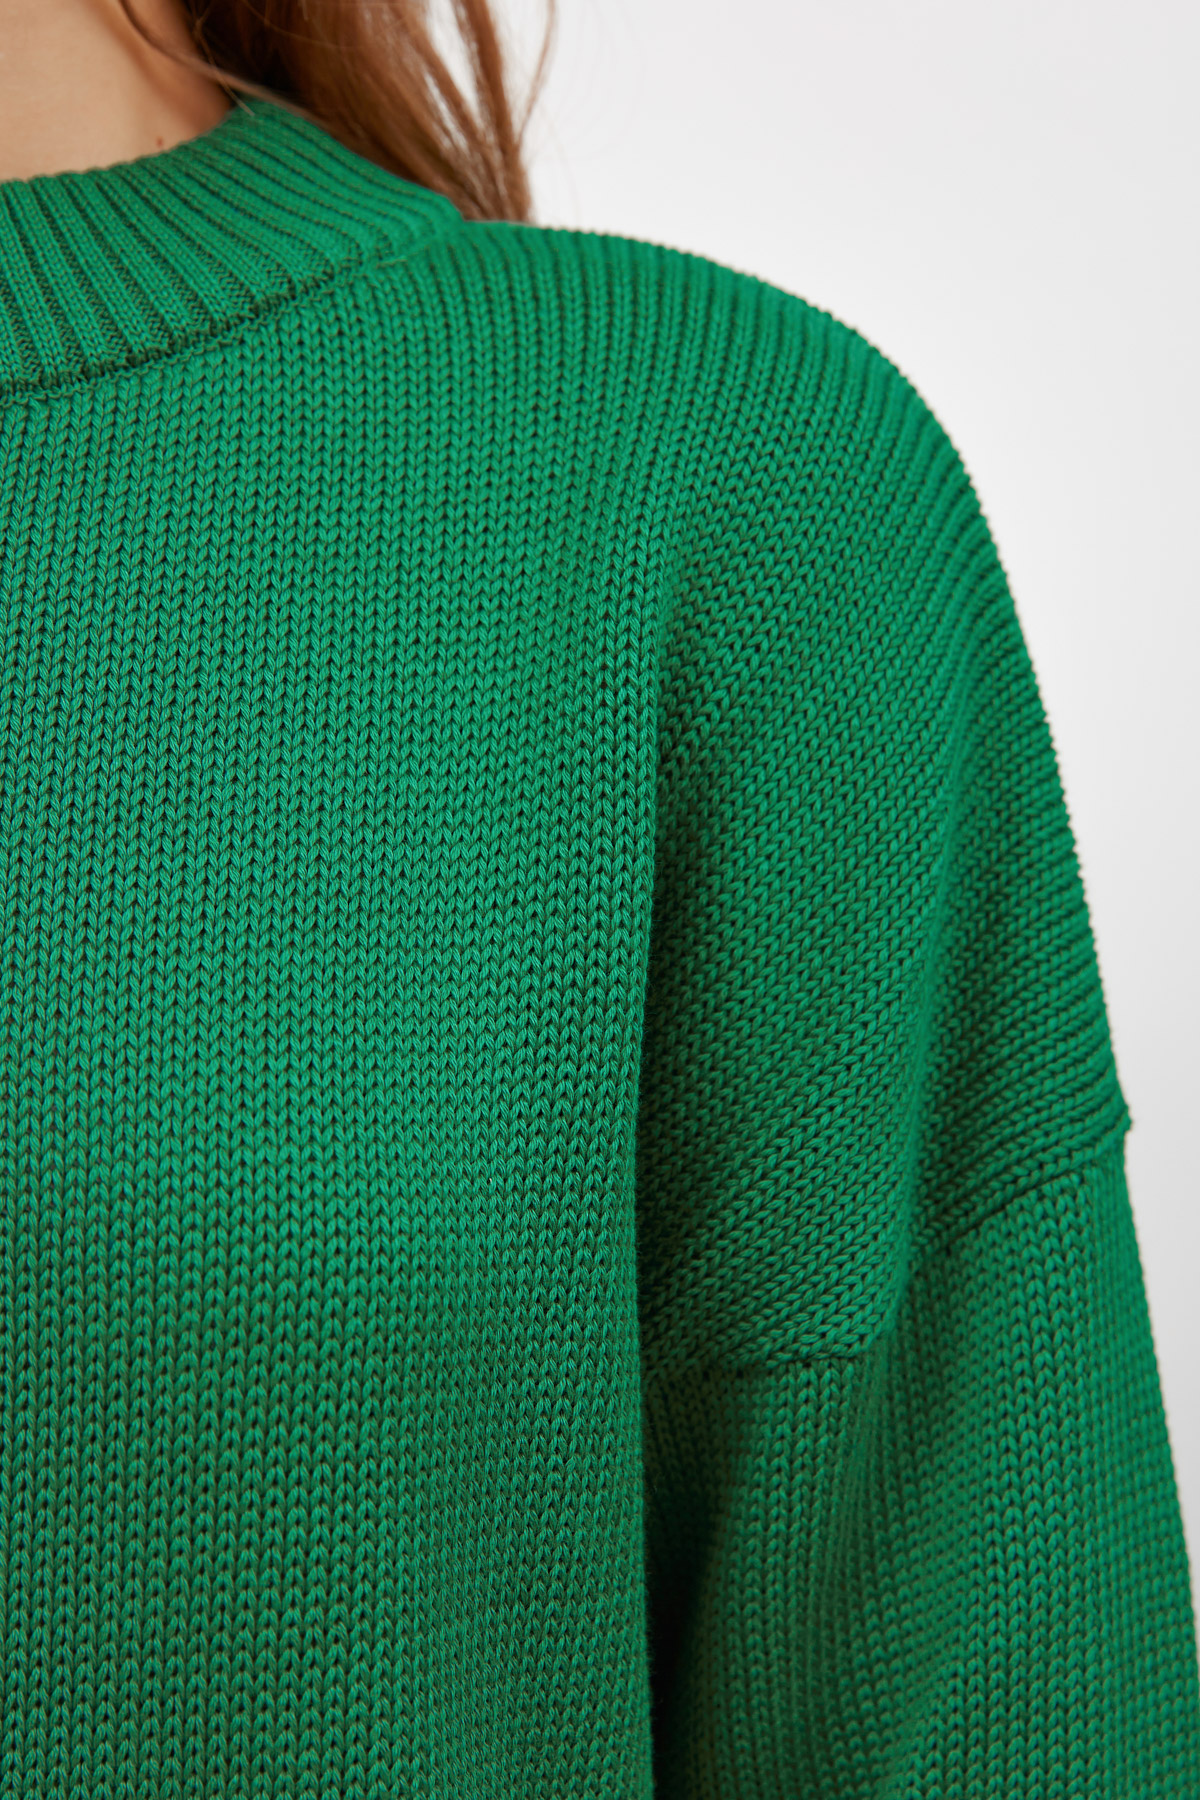 Loose fit green cotton sweater, photo 3